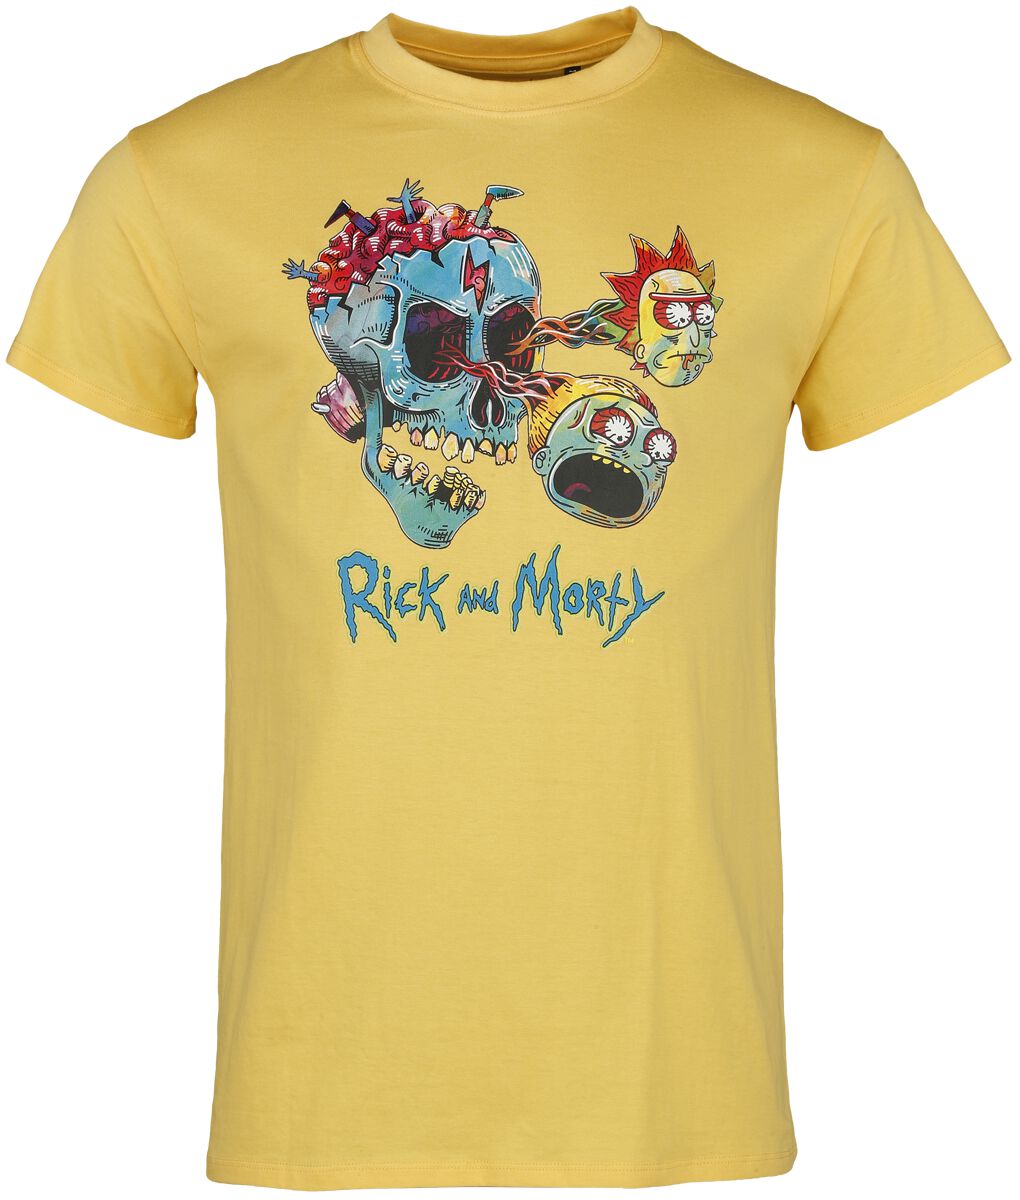 Rick And Morty Summer Vibes T-Shirt gelb in L